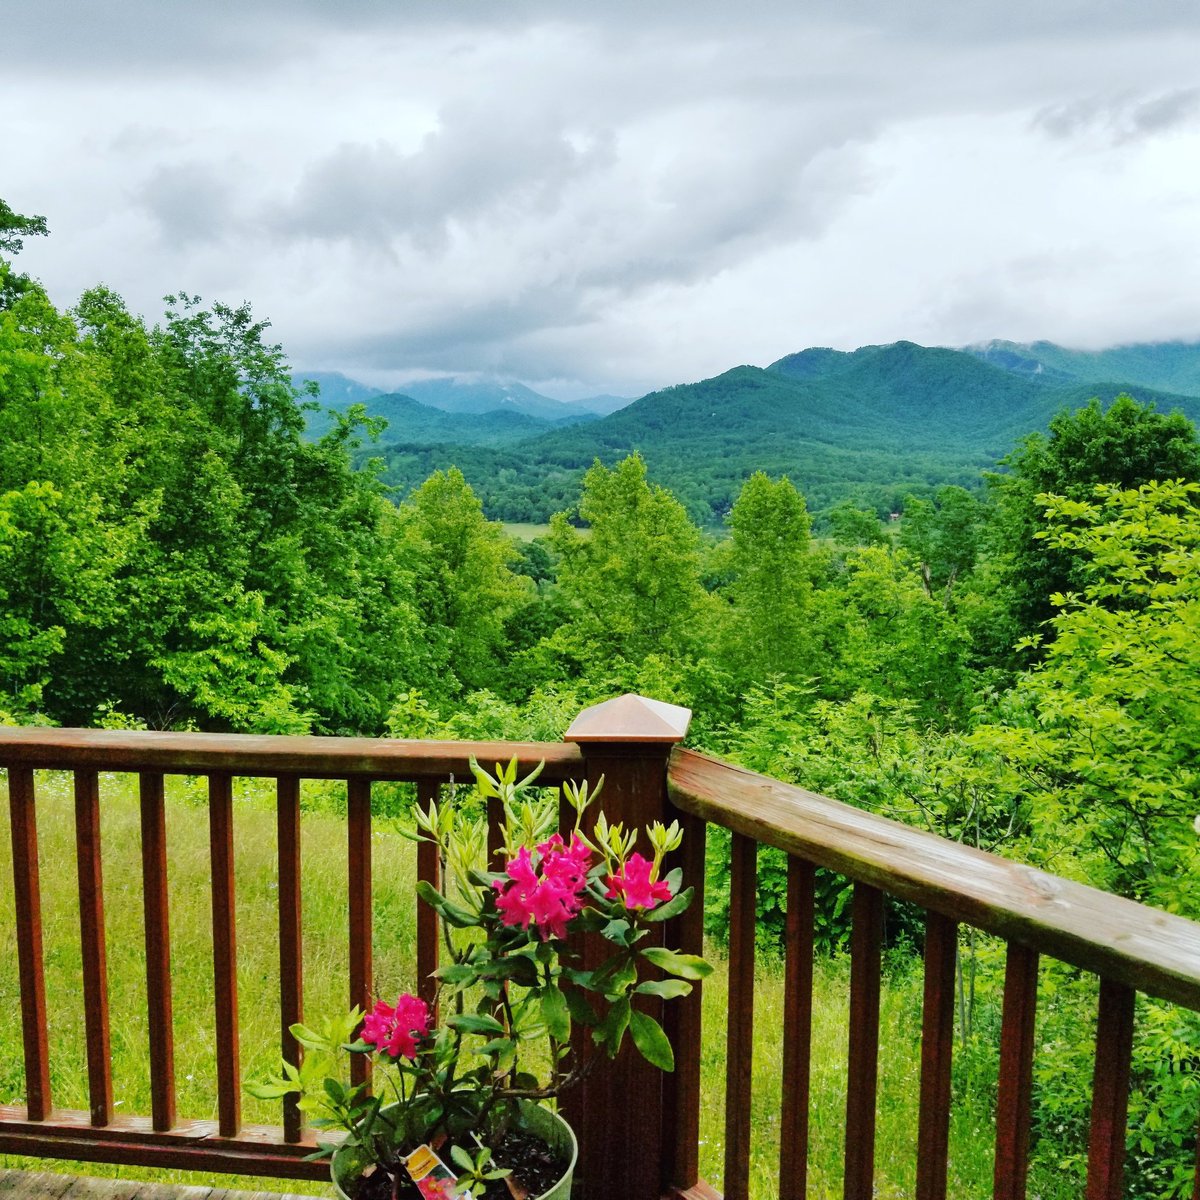 There's nothing like a cool, misty day in the #mountains to make you appreciate life! Wish you were here... oh wait, you could be... 💜

#grateful🙏 #travel #mountainvacation #mountainlife #NC #vacationhome #vacation🌴 #relaxing